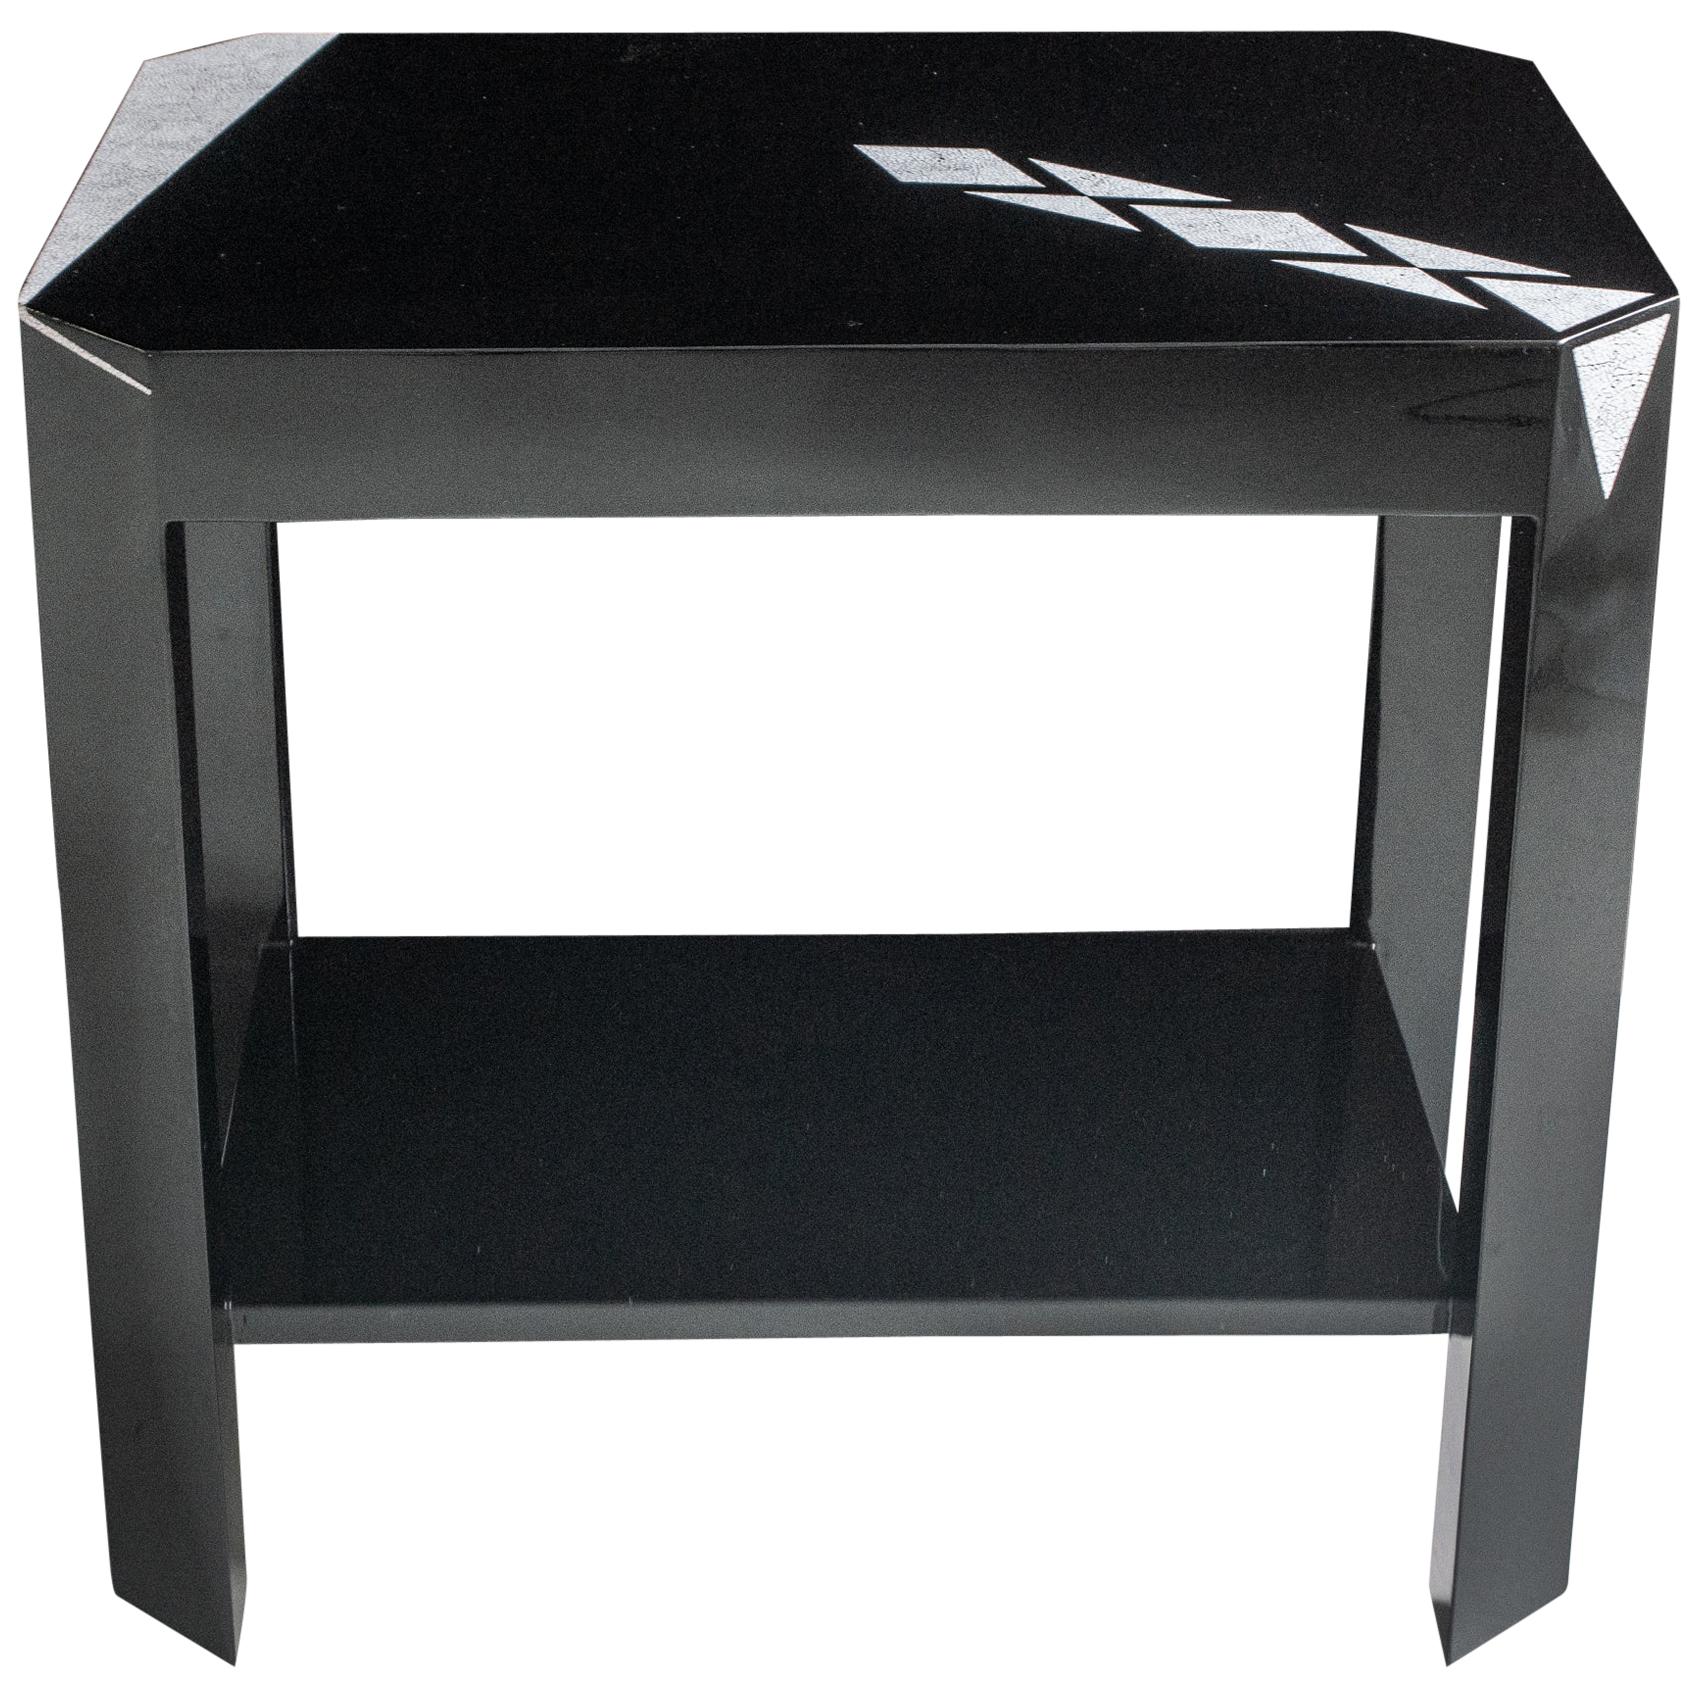 Double Level Side Tables in with Eggshell For Sale